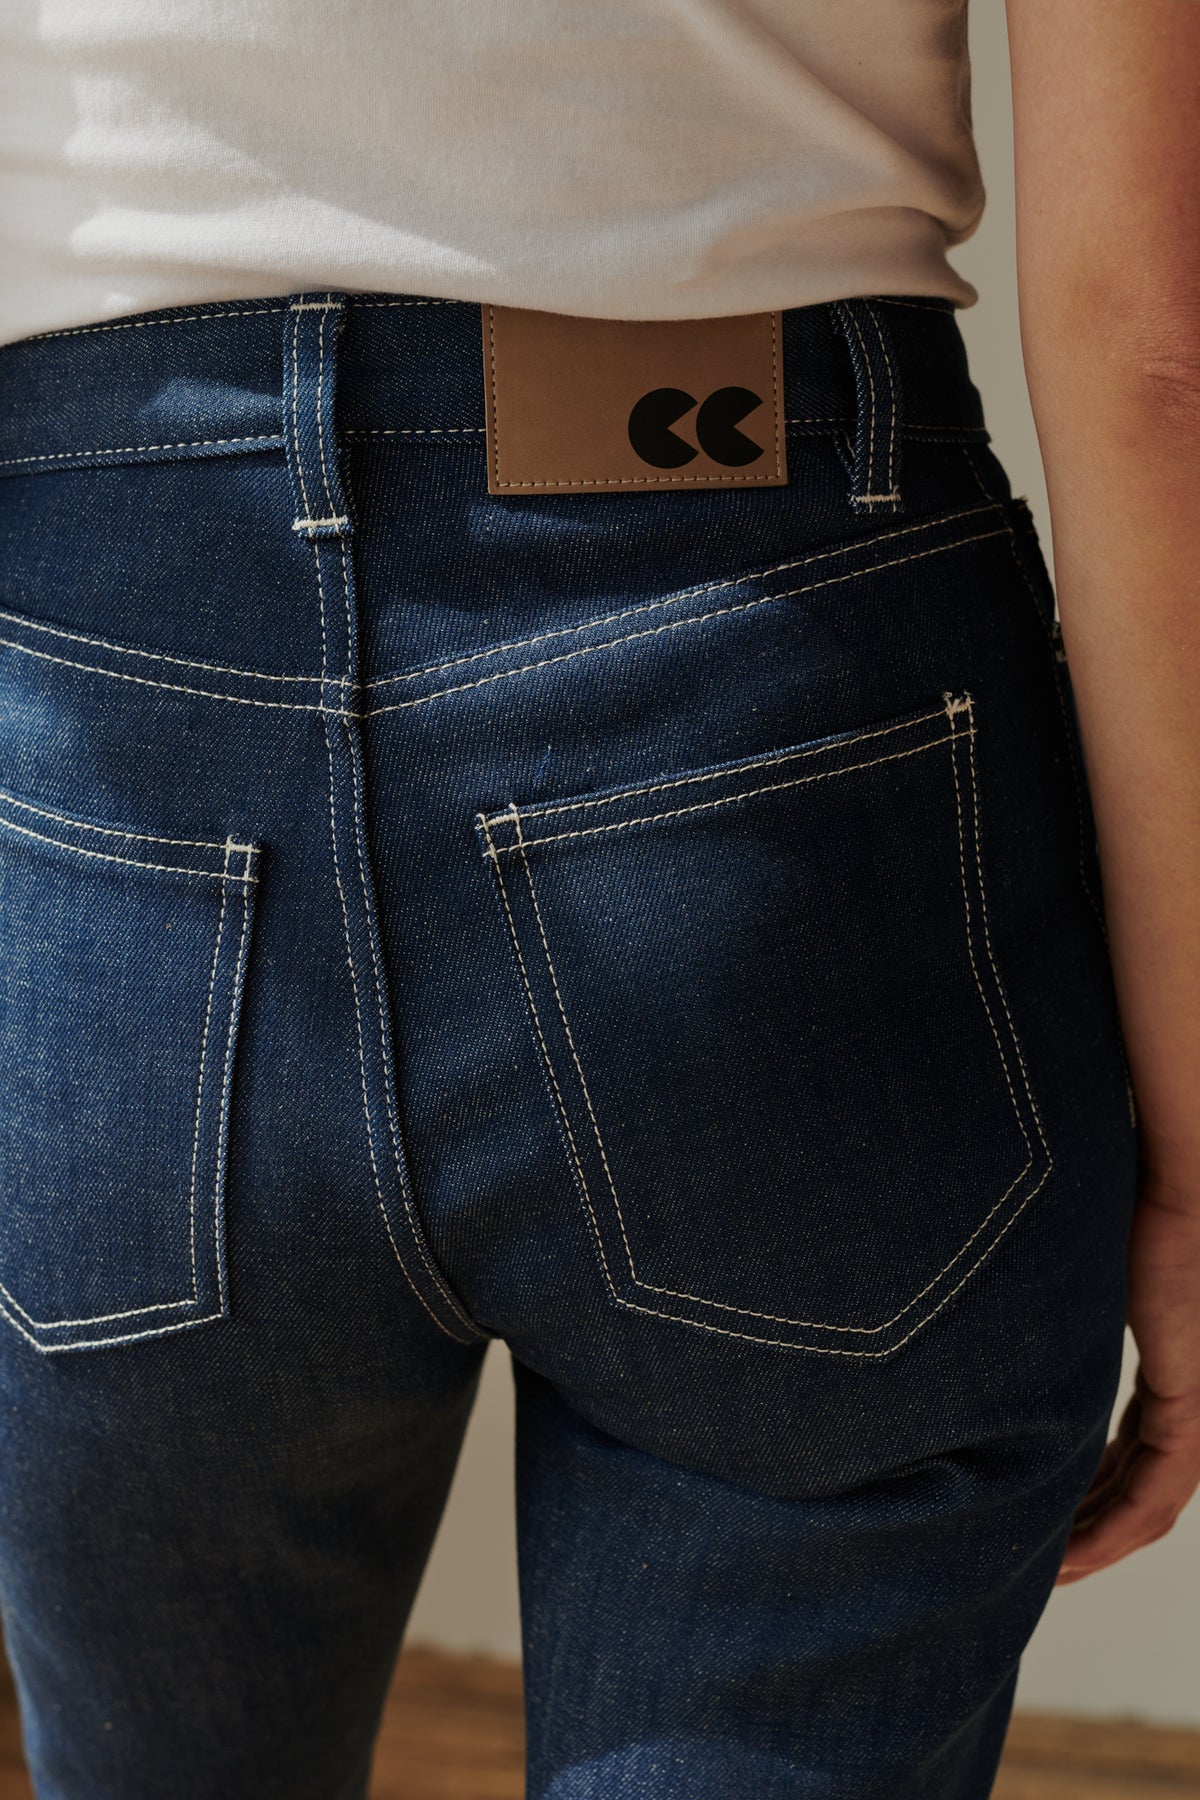 
            Back pocket and belt loop detail of female wearing straight leg high rise jean in blue.